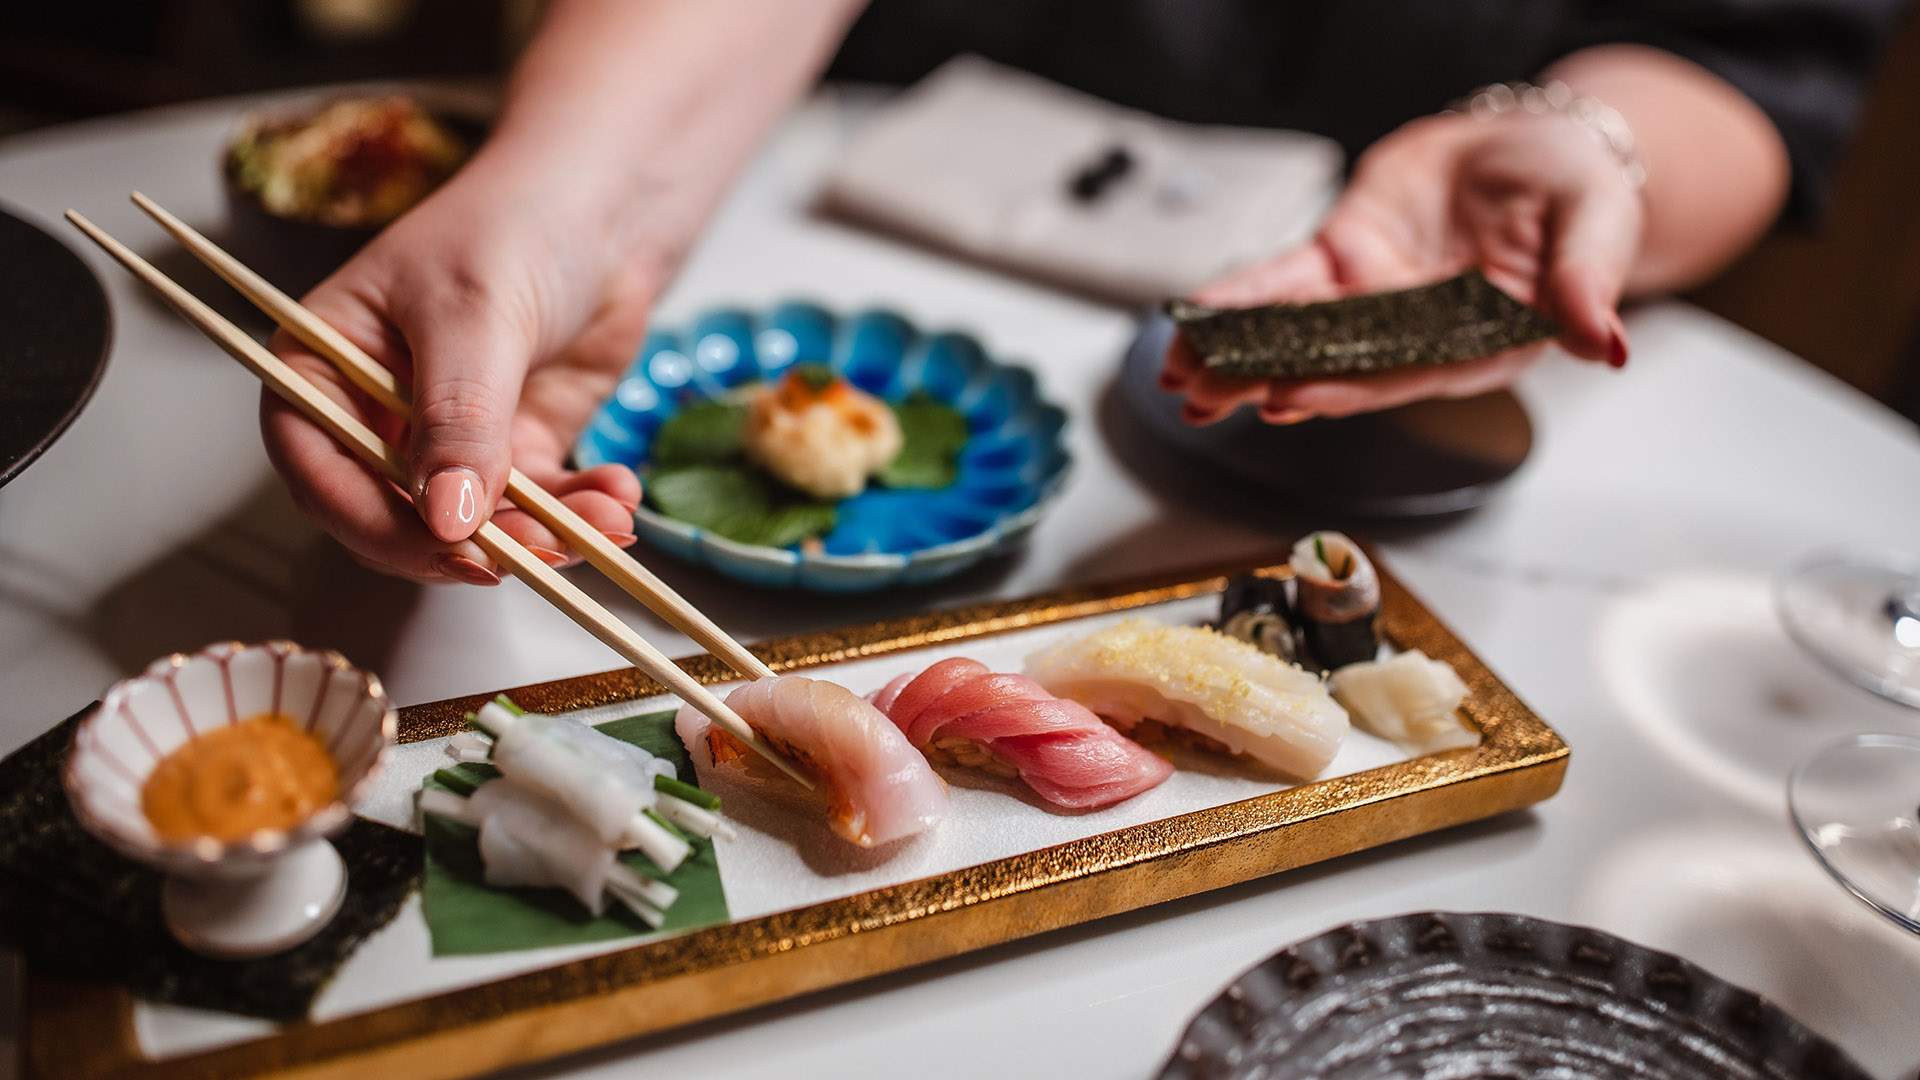 Now Open: Ippin Is West End's New 140-Seat Japanese Restaurant with Sea-to-Table Sashimi and Garden Views